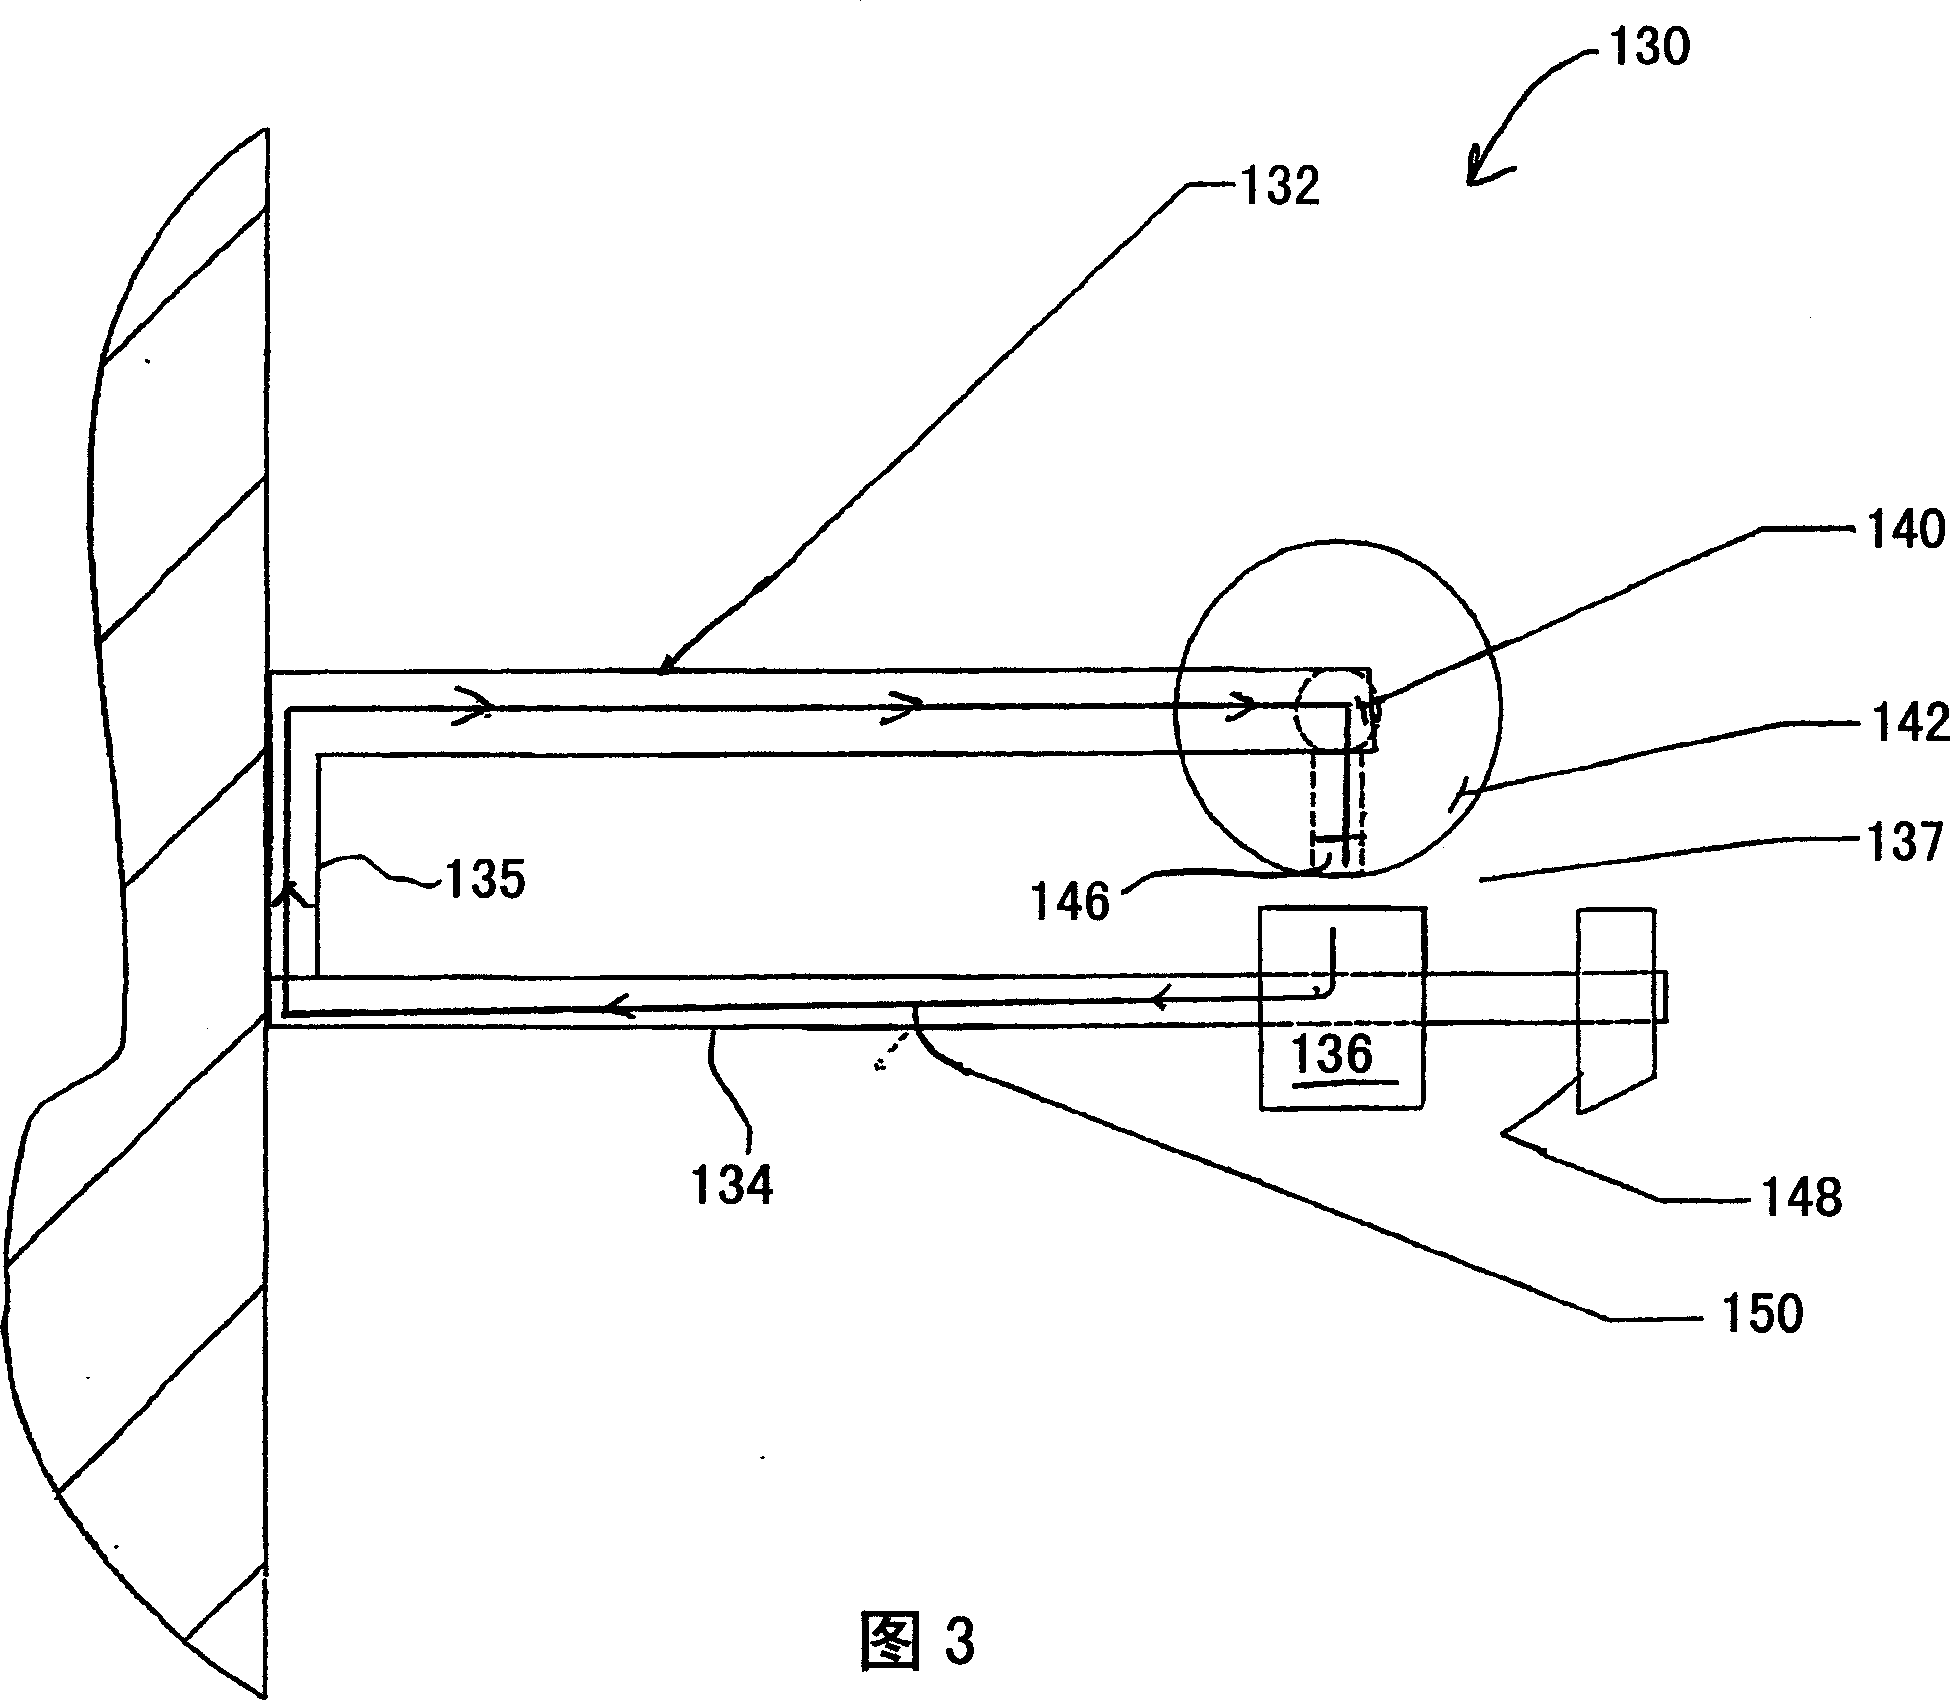 Apparatus and method for cutting sheet-type work material using a blade reciprocated via a tuned resonator